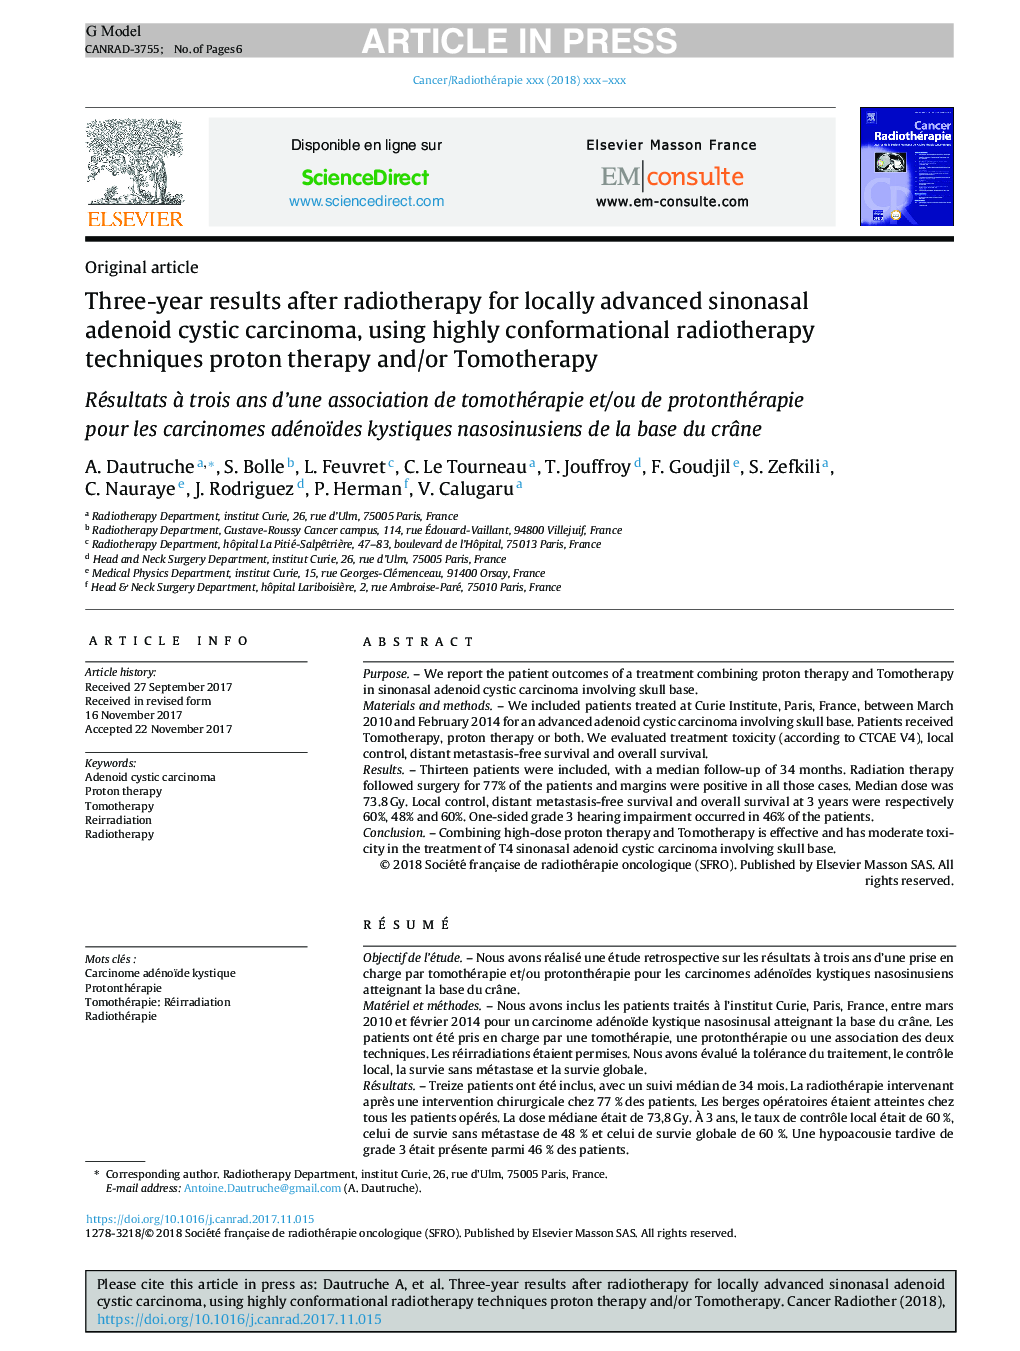 Three-year results after radiotherapy for locally advanced sinonasal adenoid cystic carcinoma, using highly conformational radiotherapy techniques proton therapy and/or Tomotherapy